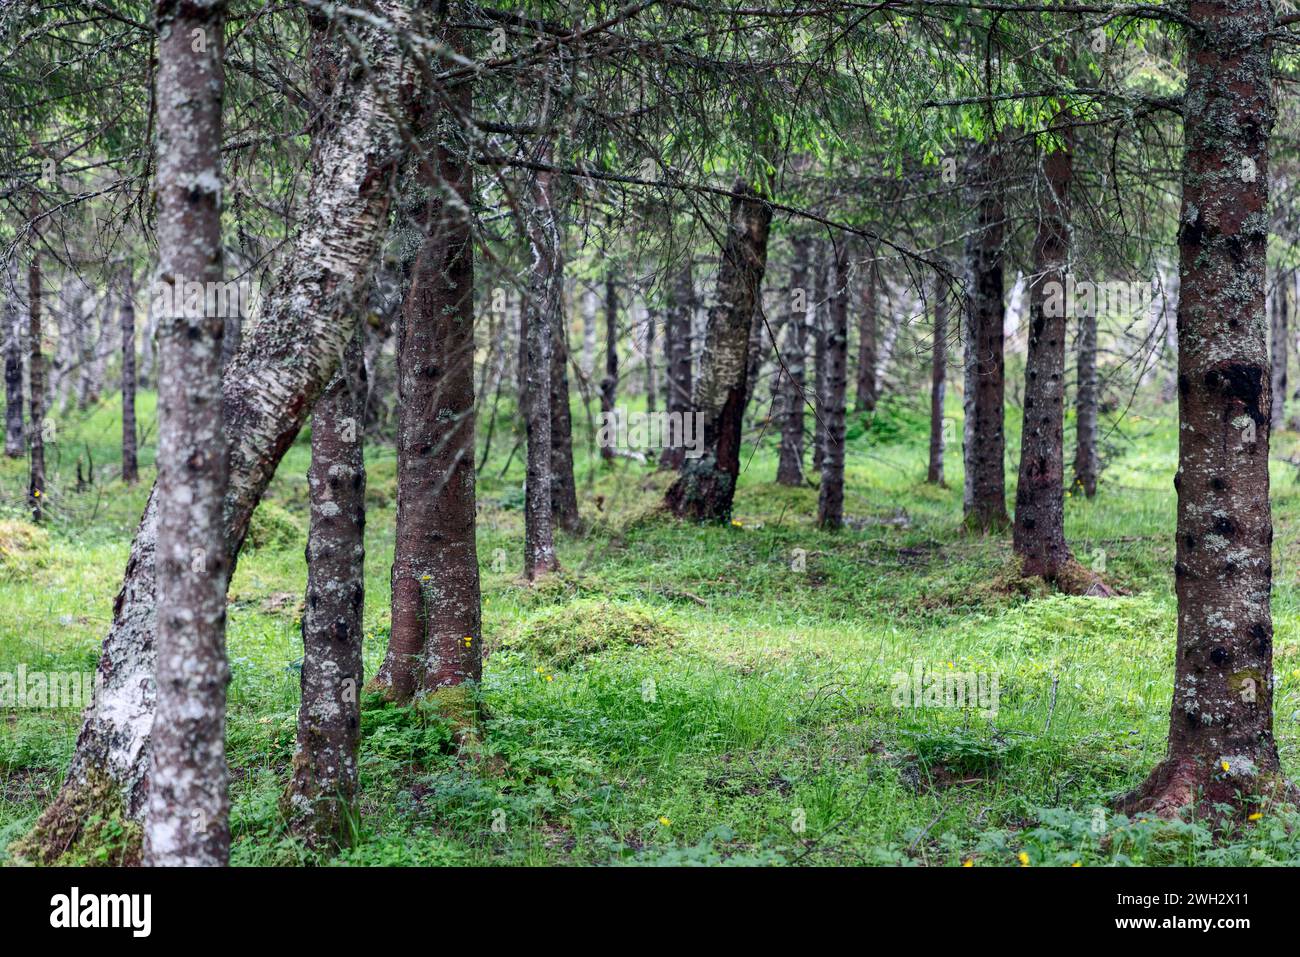 A tranquil pine forest with slender trunks and a carpet of green understory, nestled in the heart of Scandinavia's wilderness Stock Photo